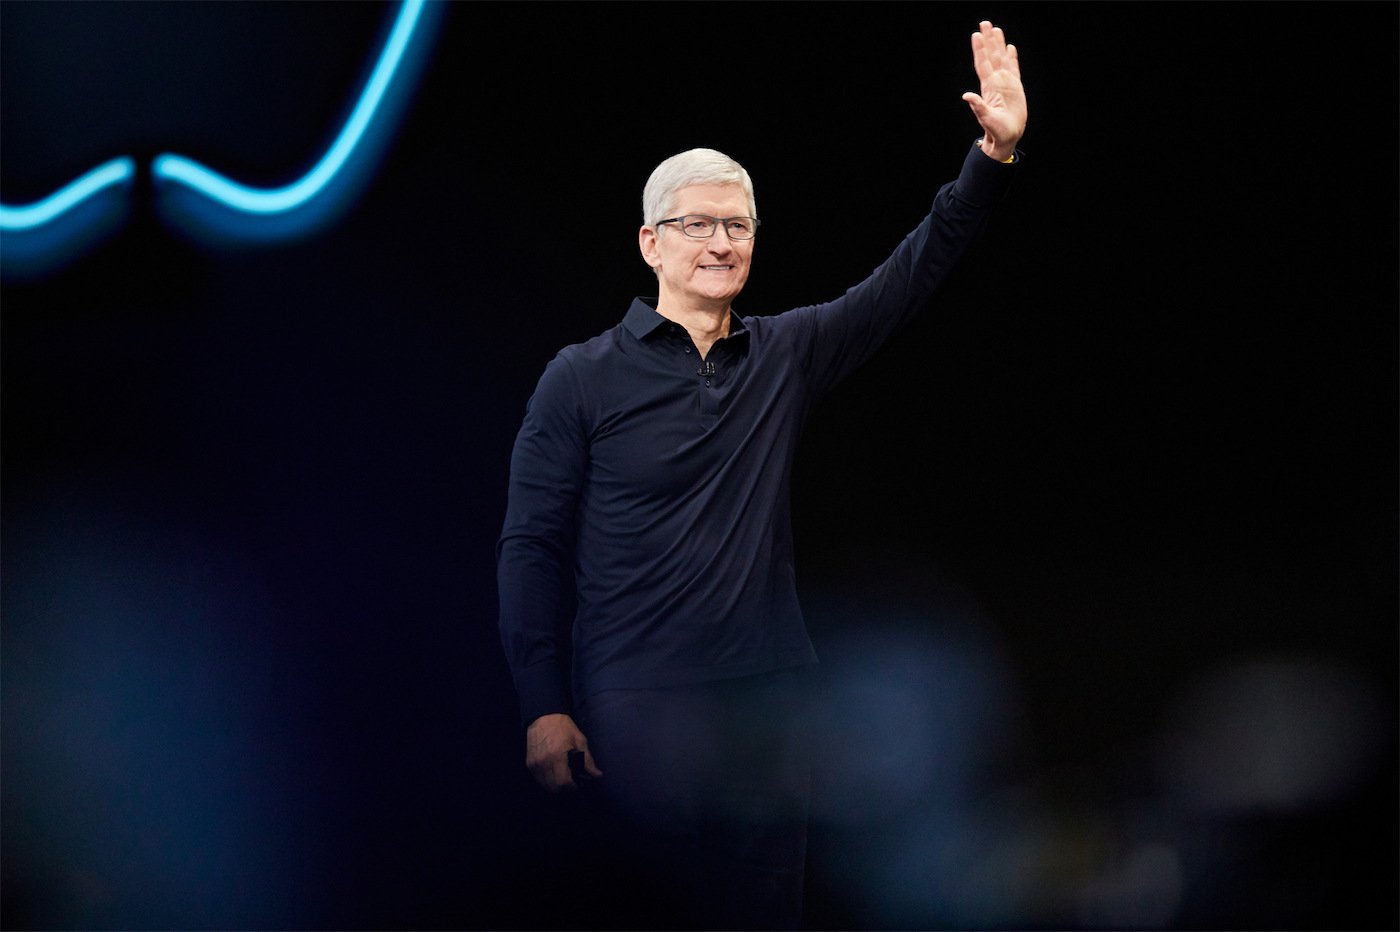 His Apple Watch saved his life, Tim Cook thanks him